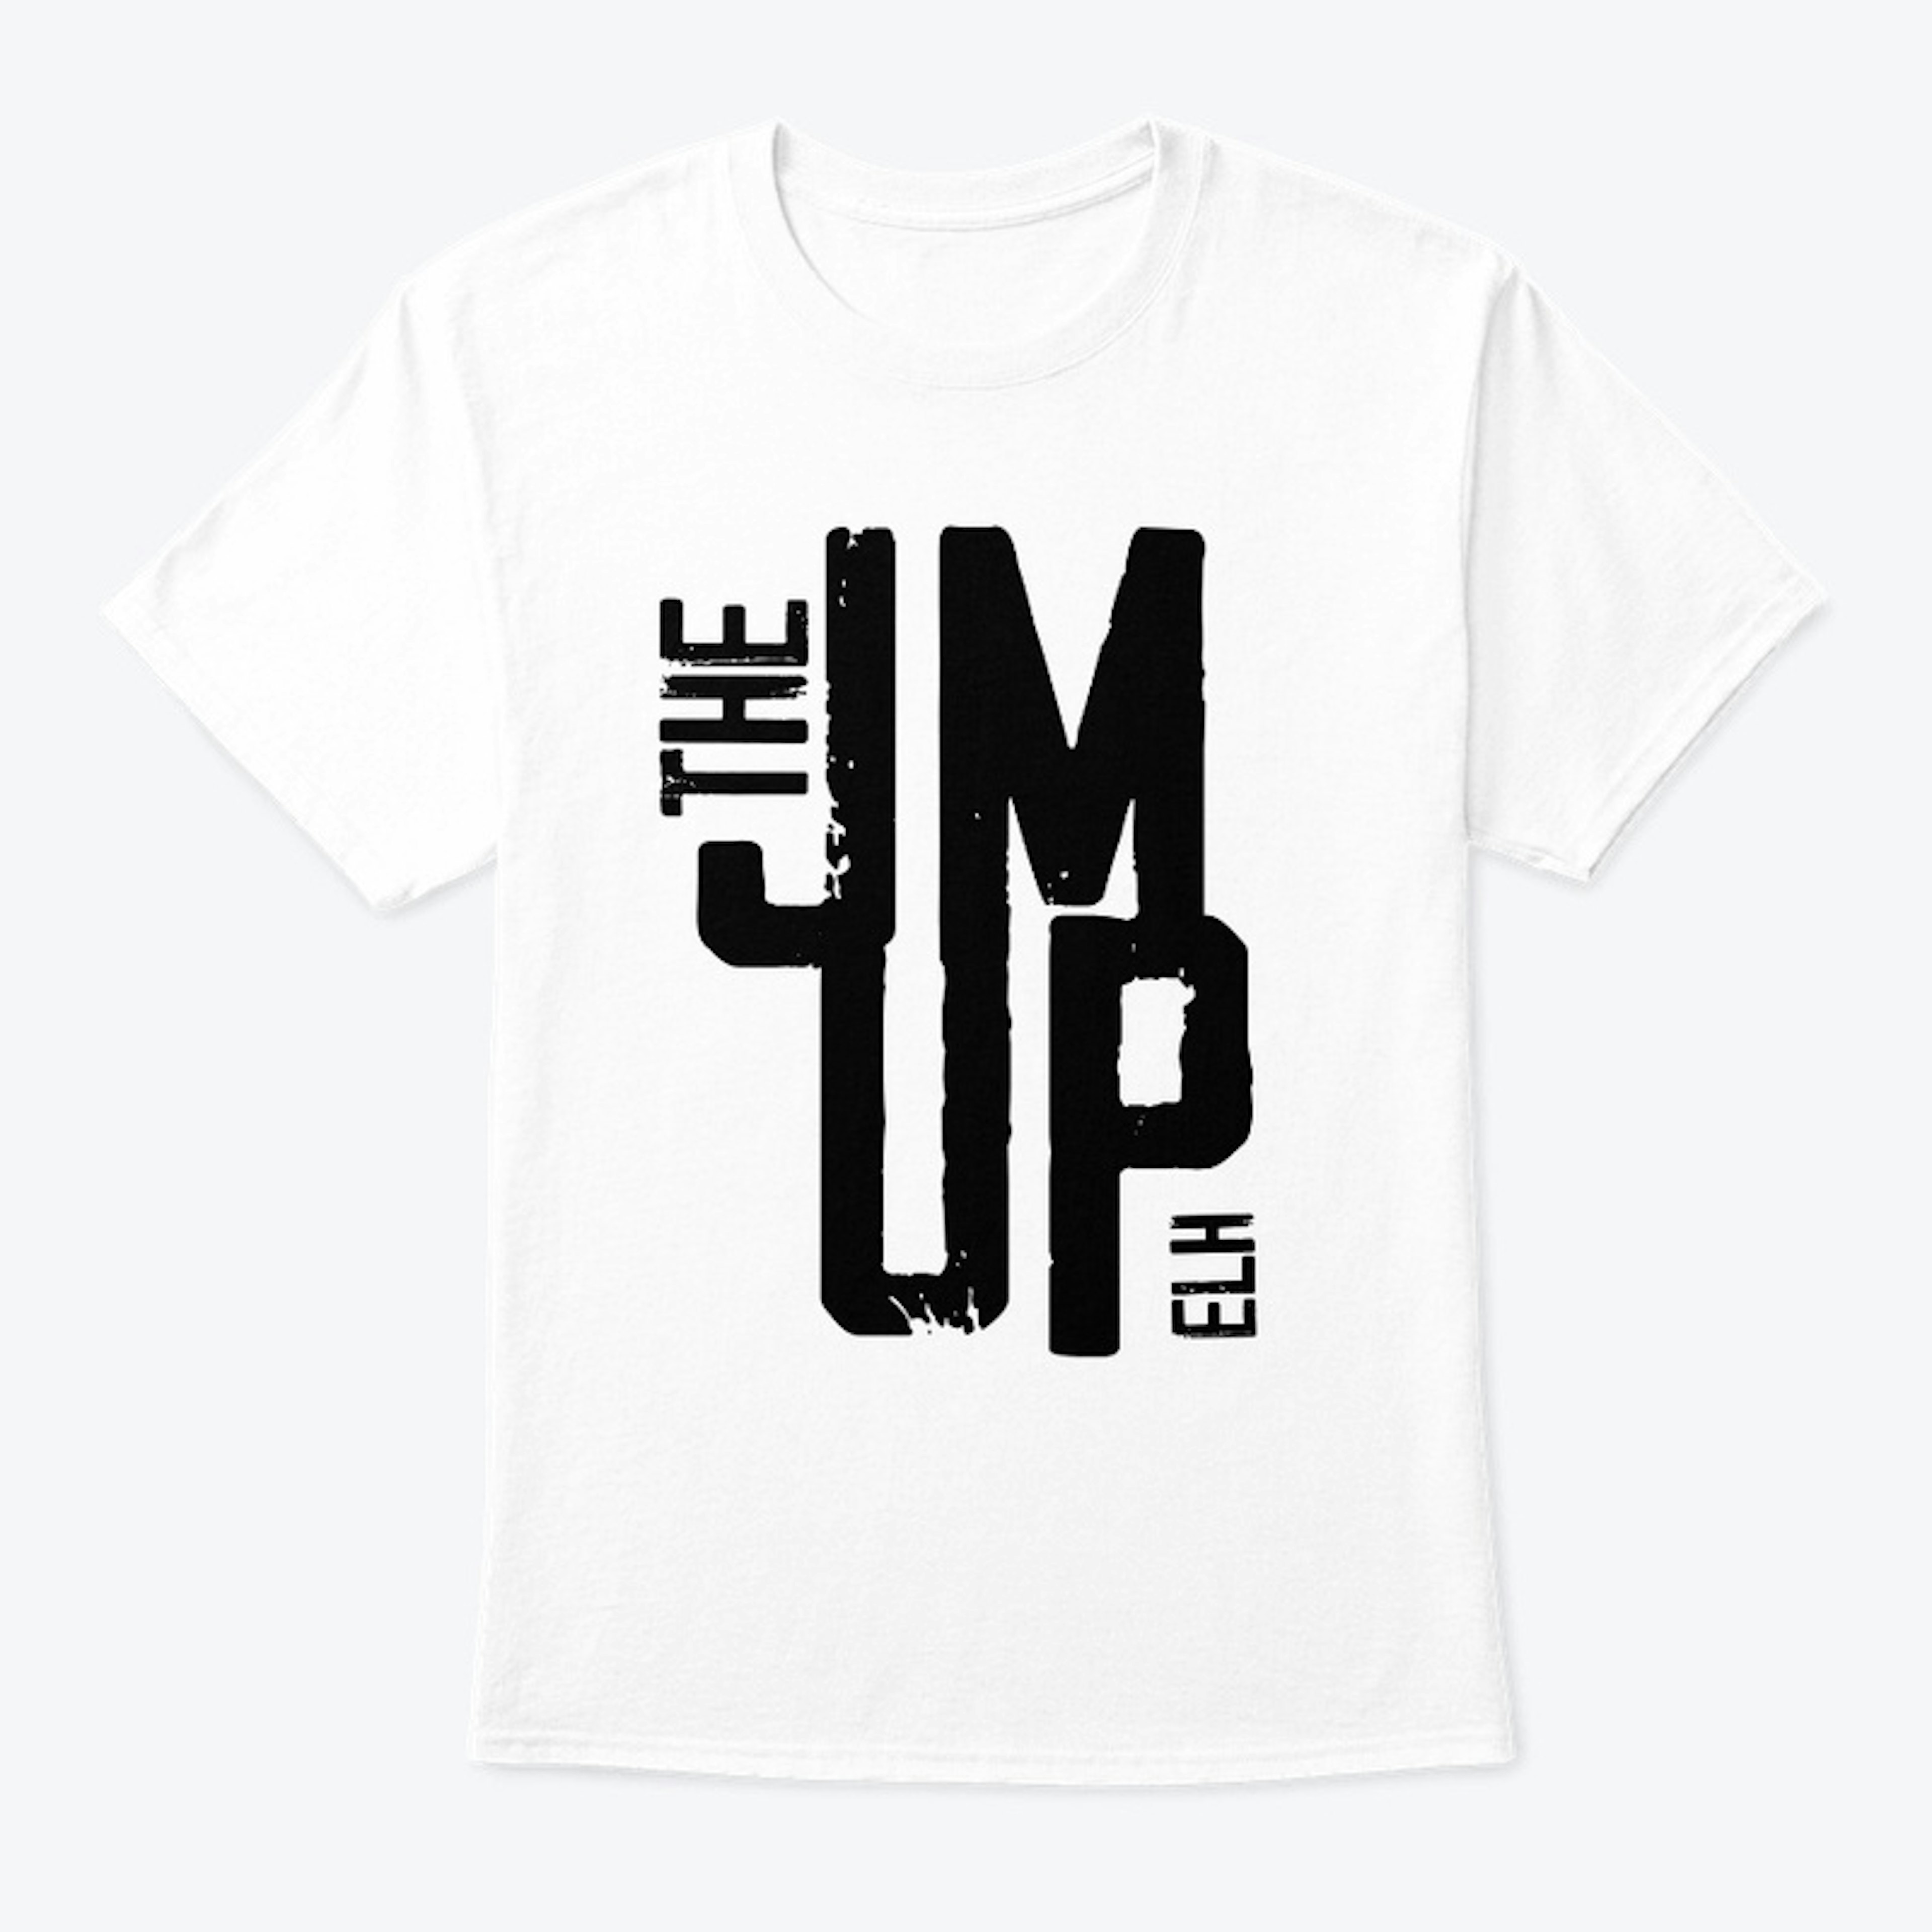 "THE JUMP" Collection